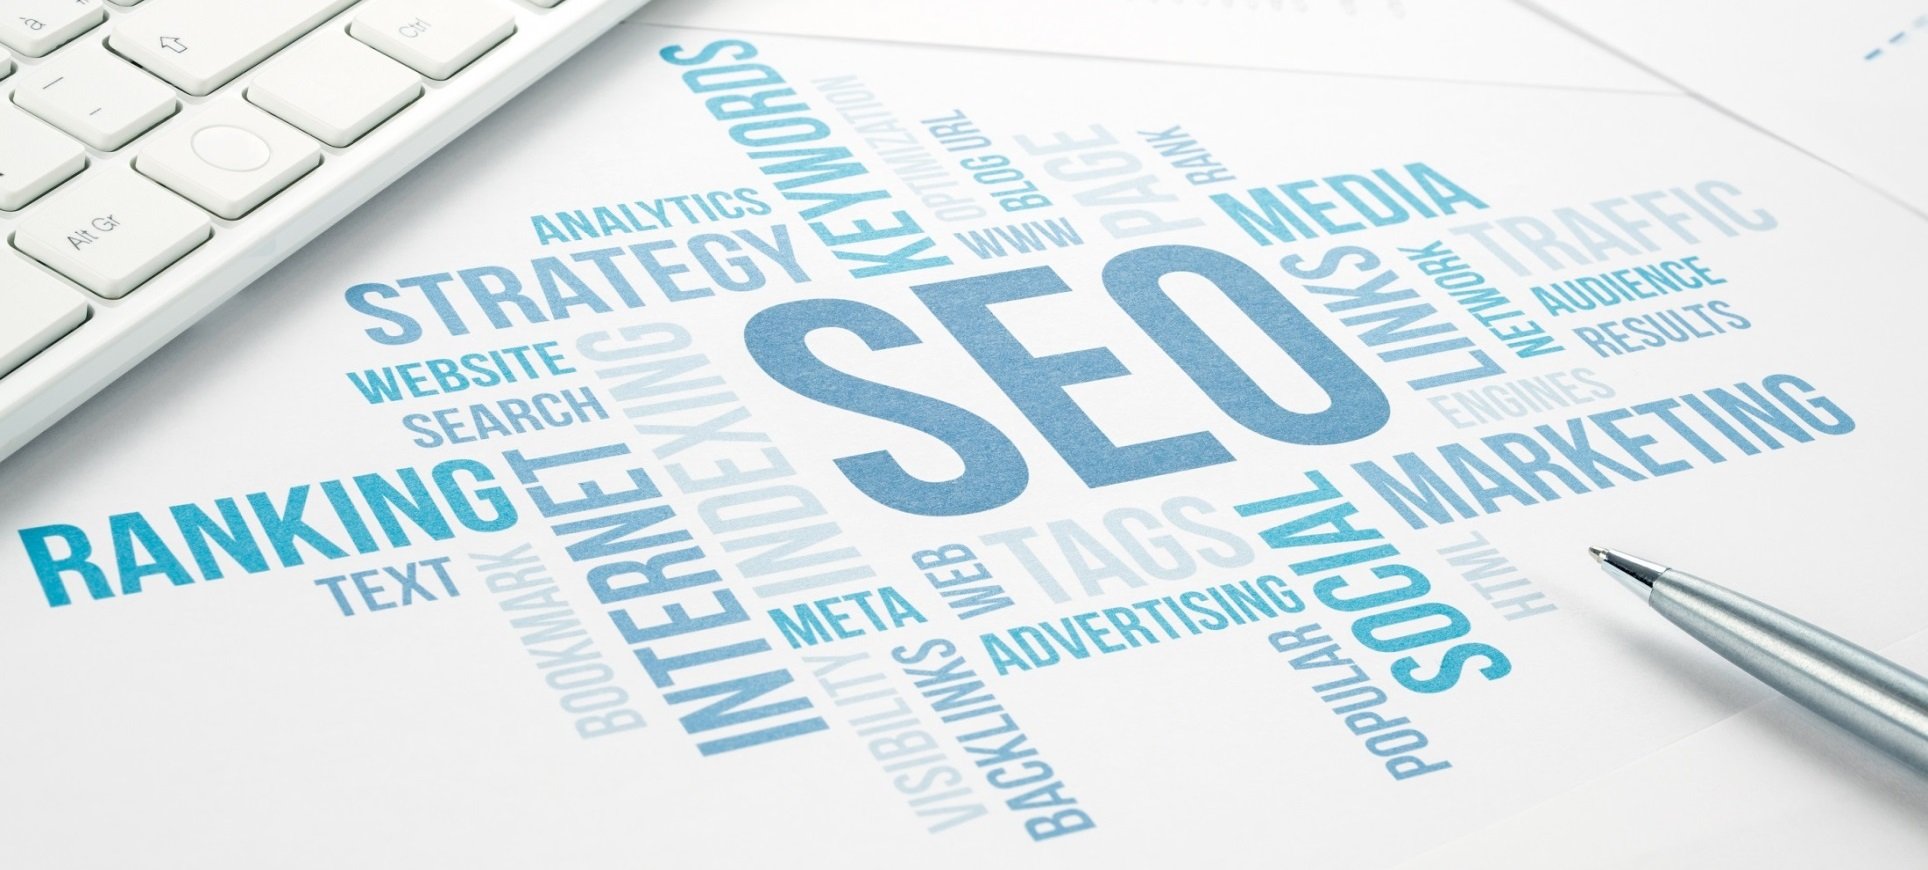 Seo Services Packages